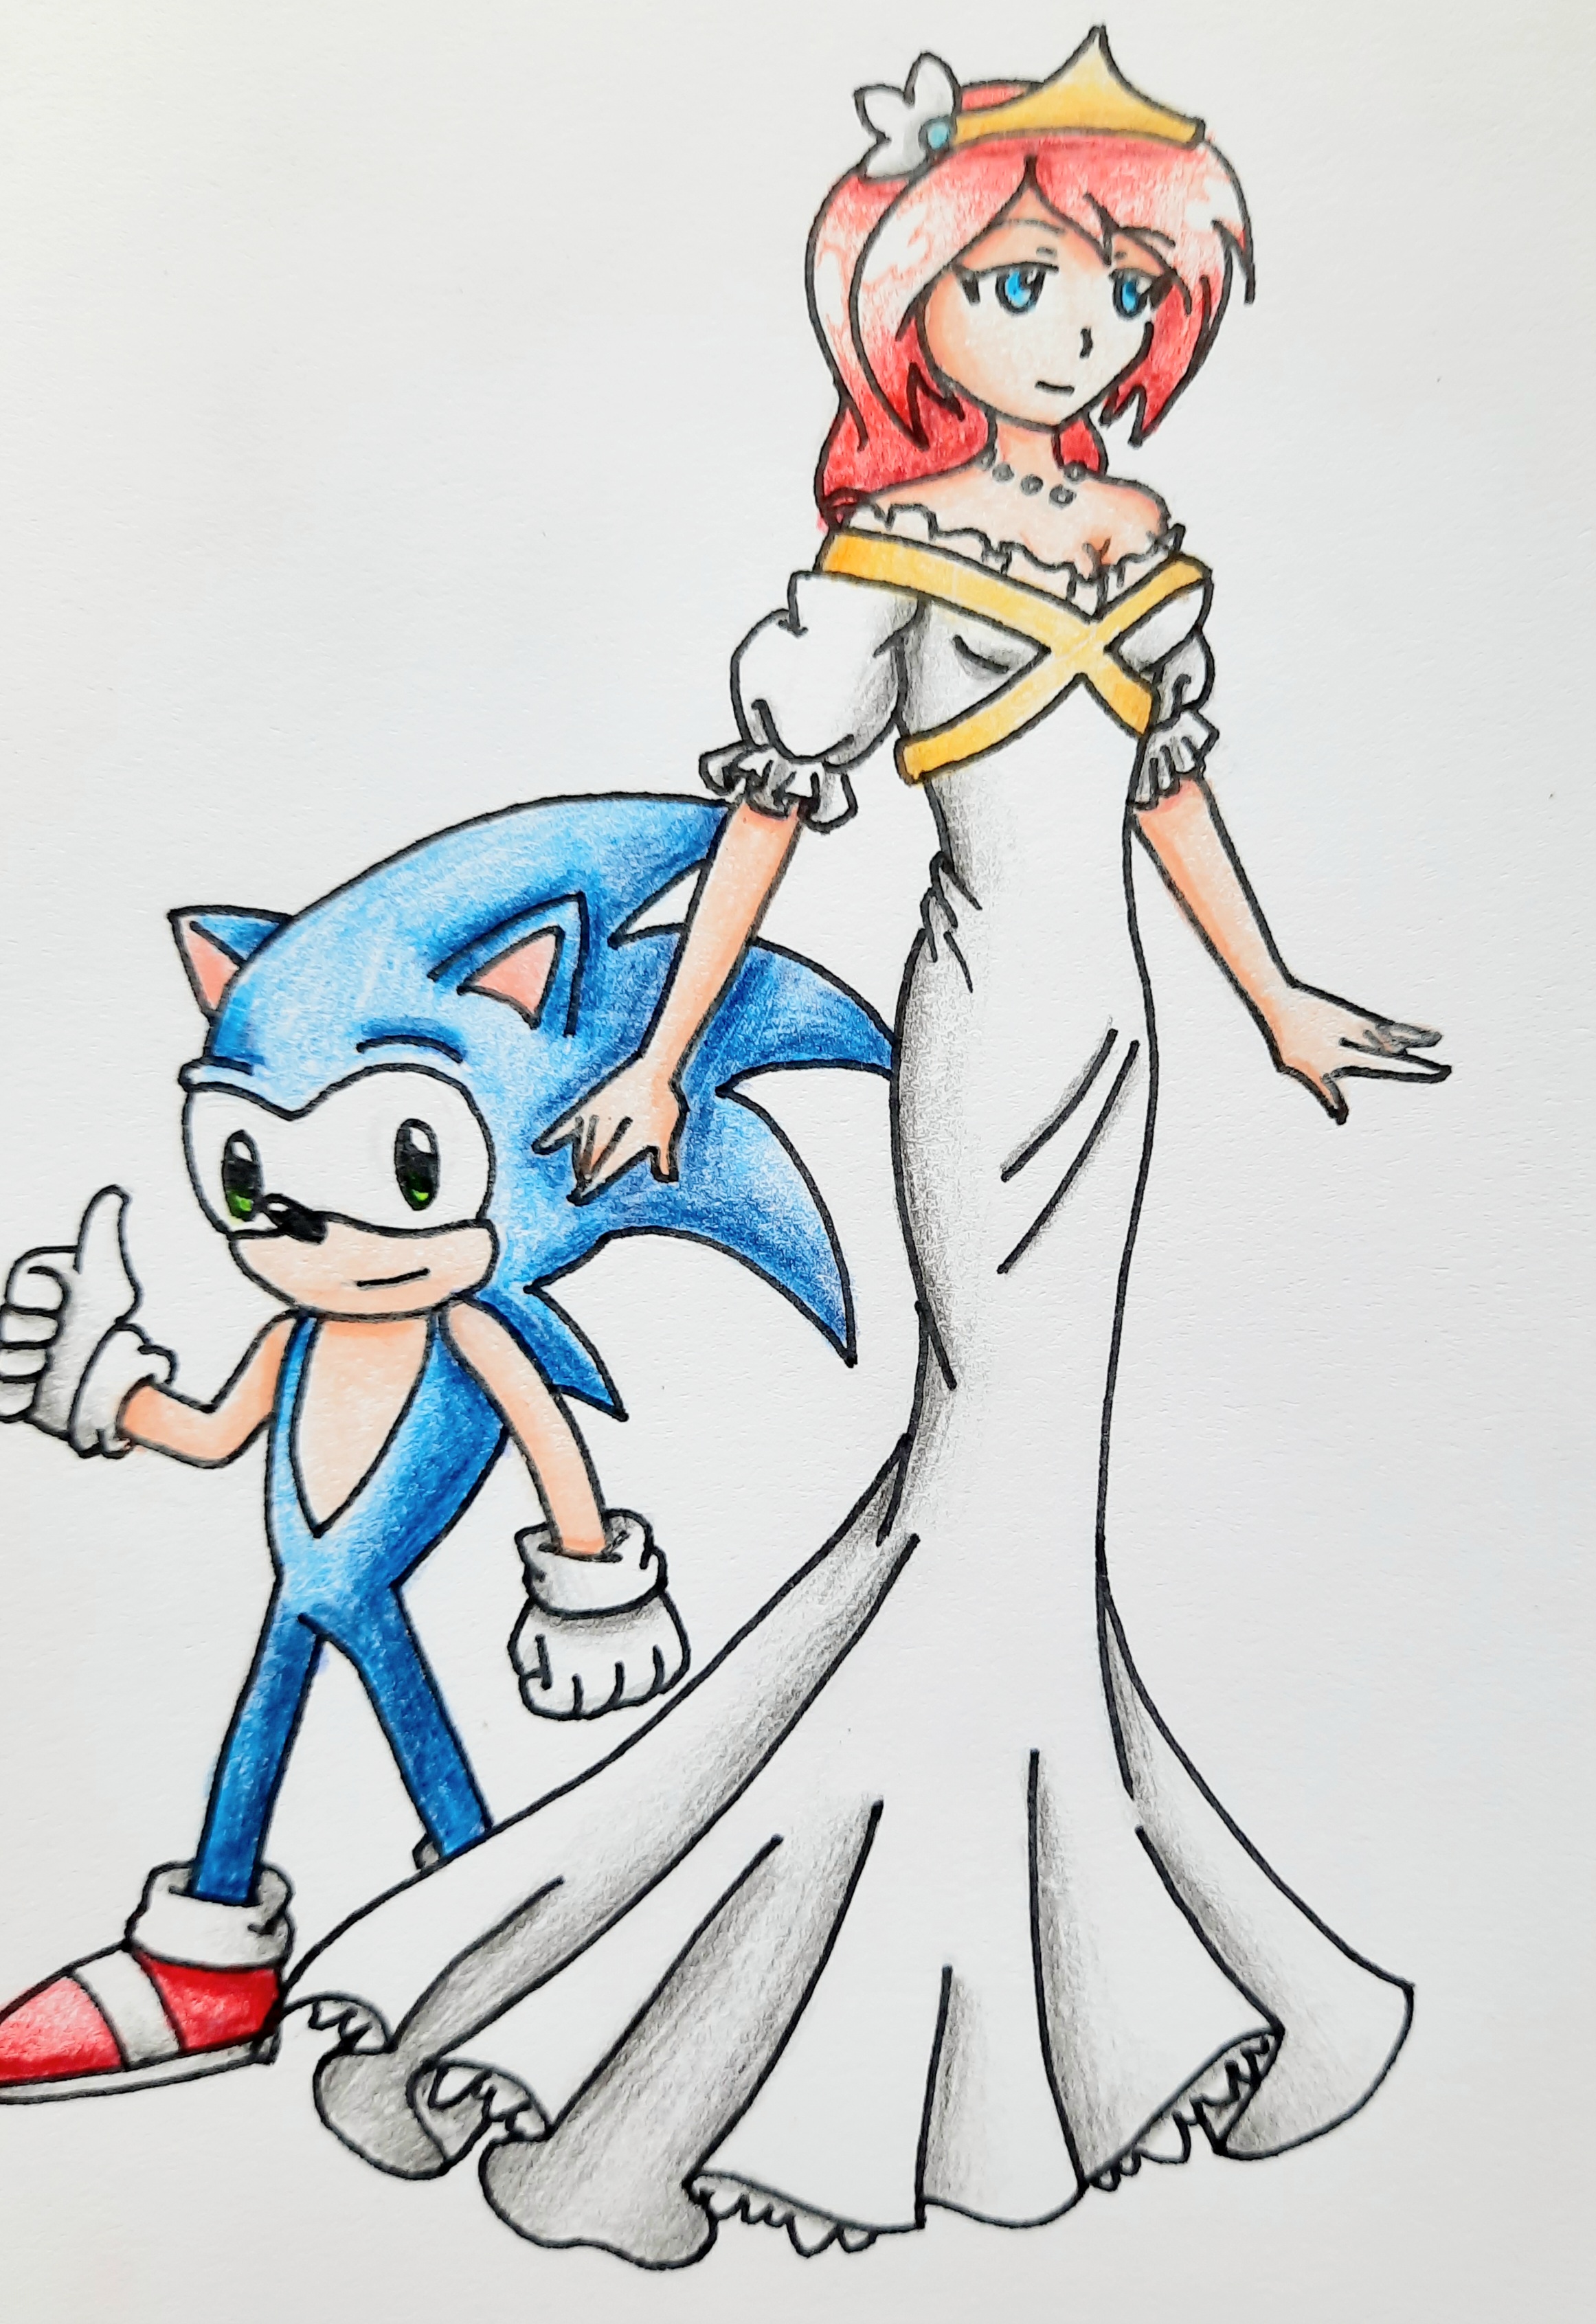 Sonic and Elise by Punisher2006 on DeviantArt